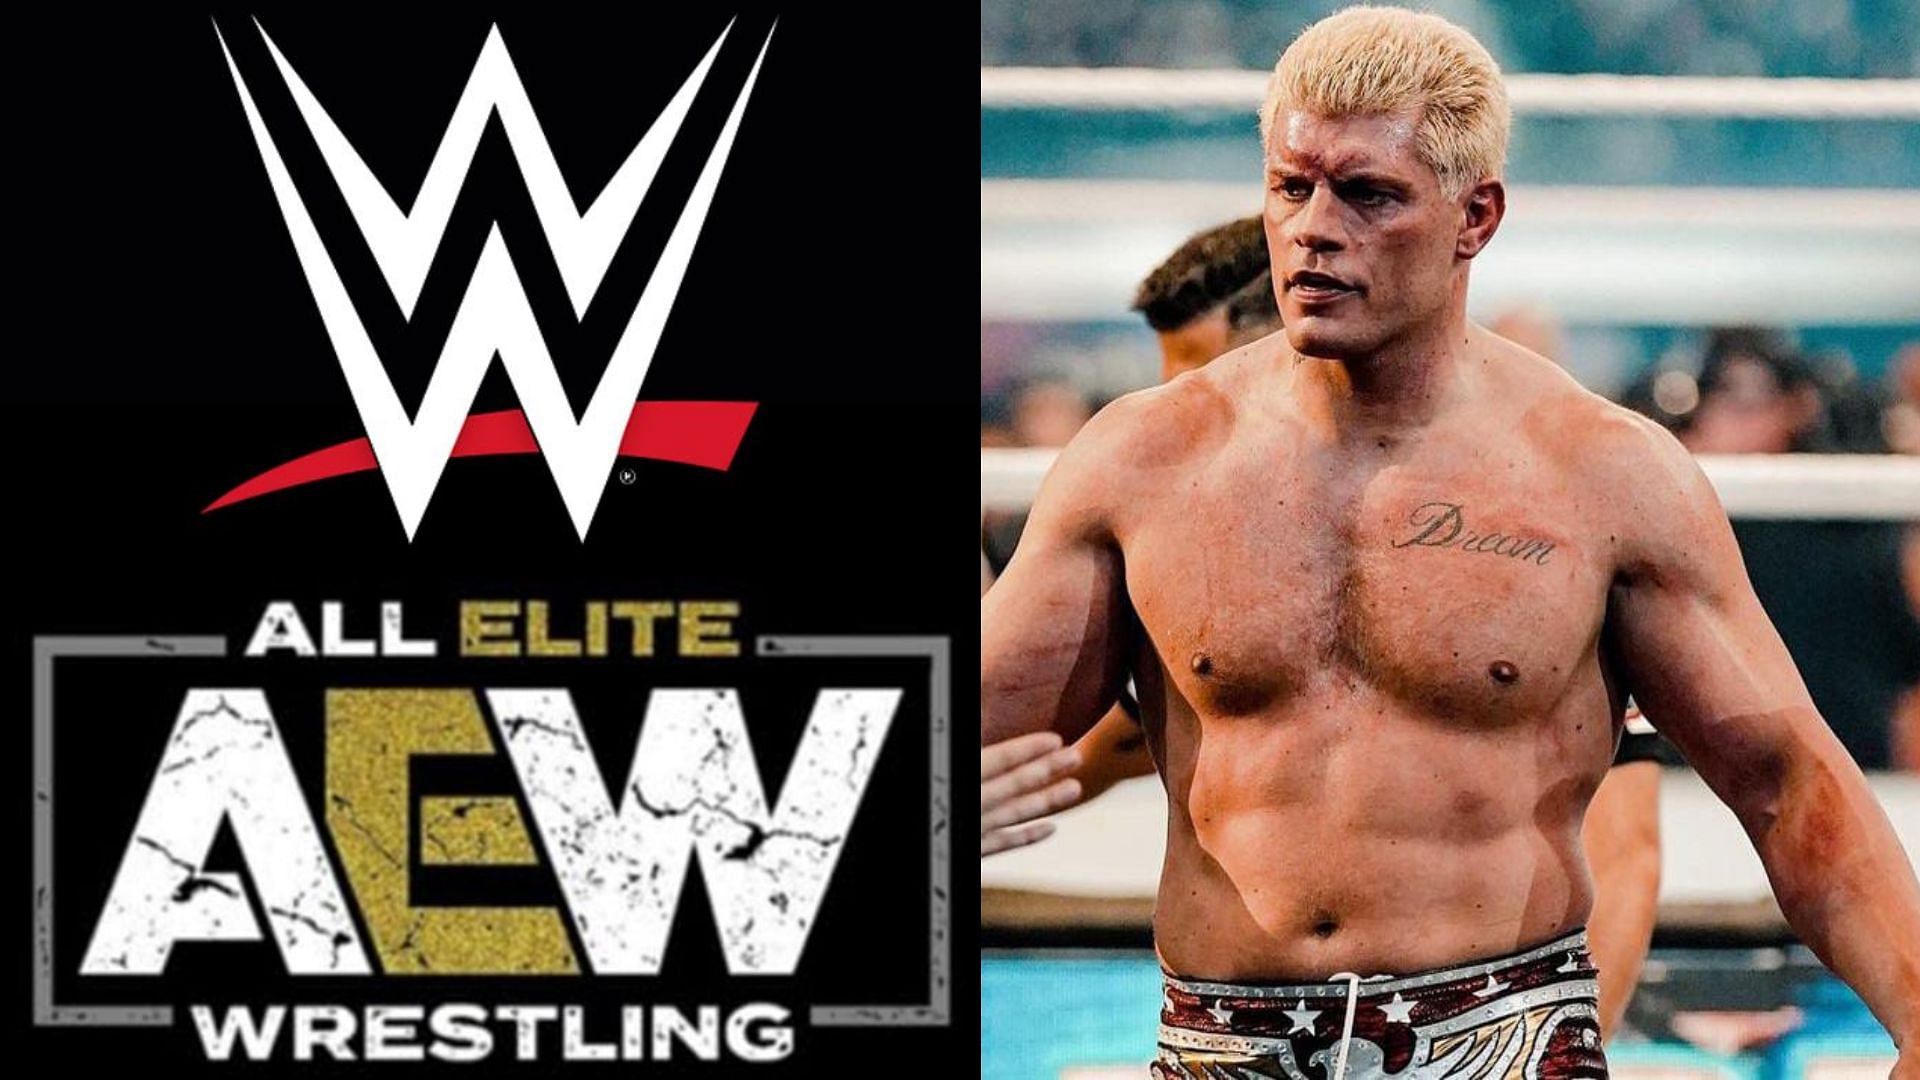 Cody Rhoes is a former AEW superstar now signed with WWE